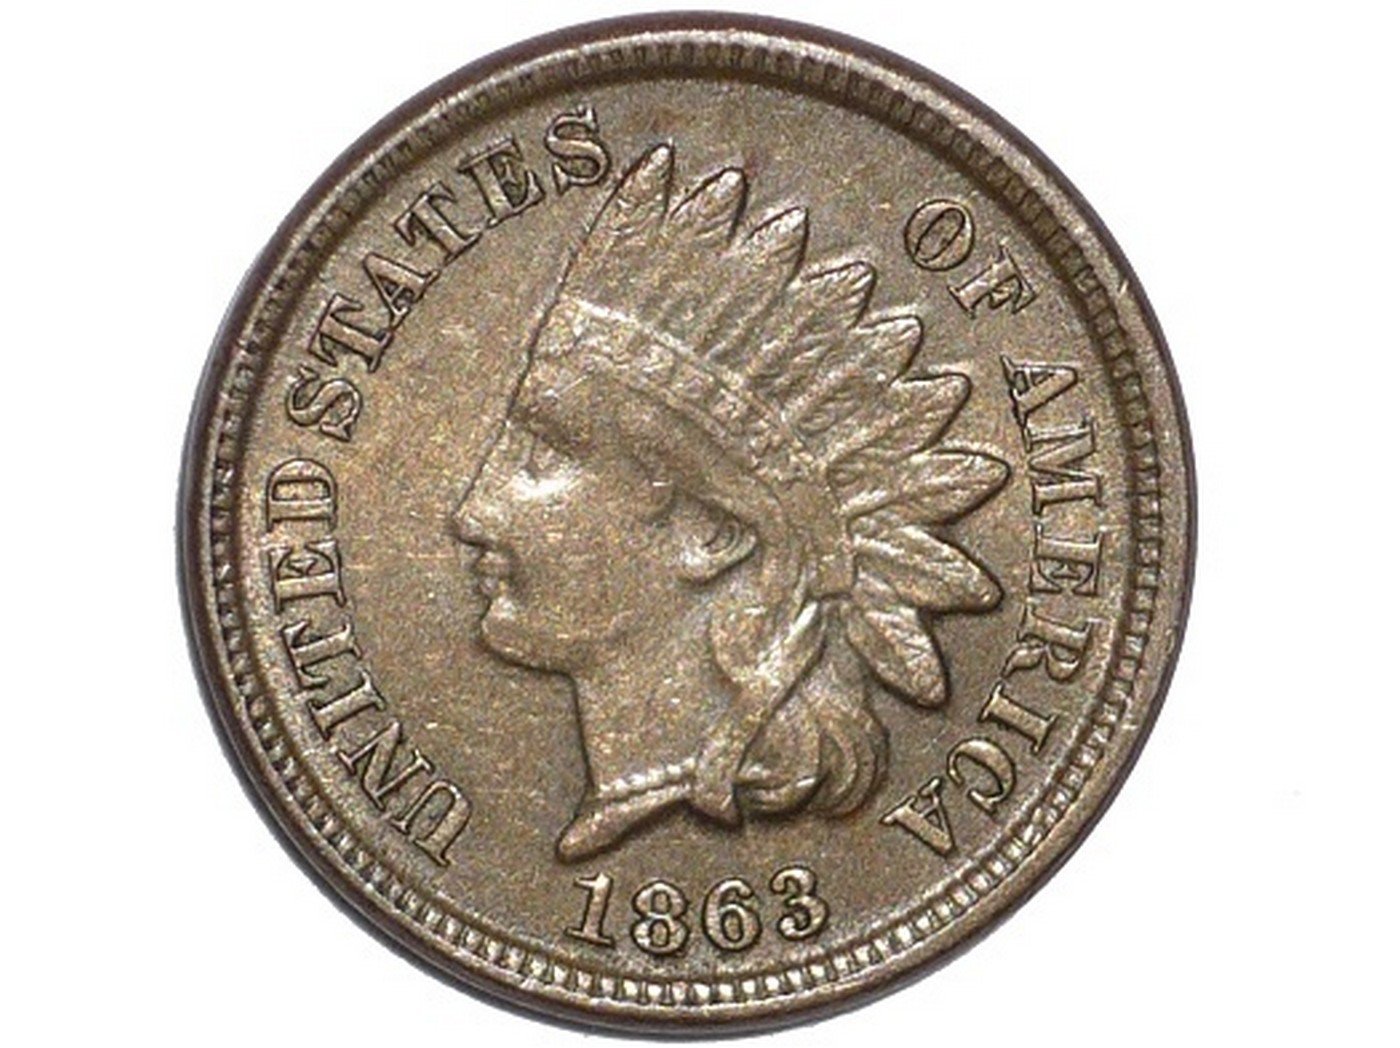 1863 Obverse of CRK-004 - Indian Head Penny - Photo by David Poliquin